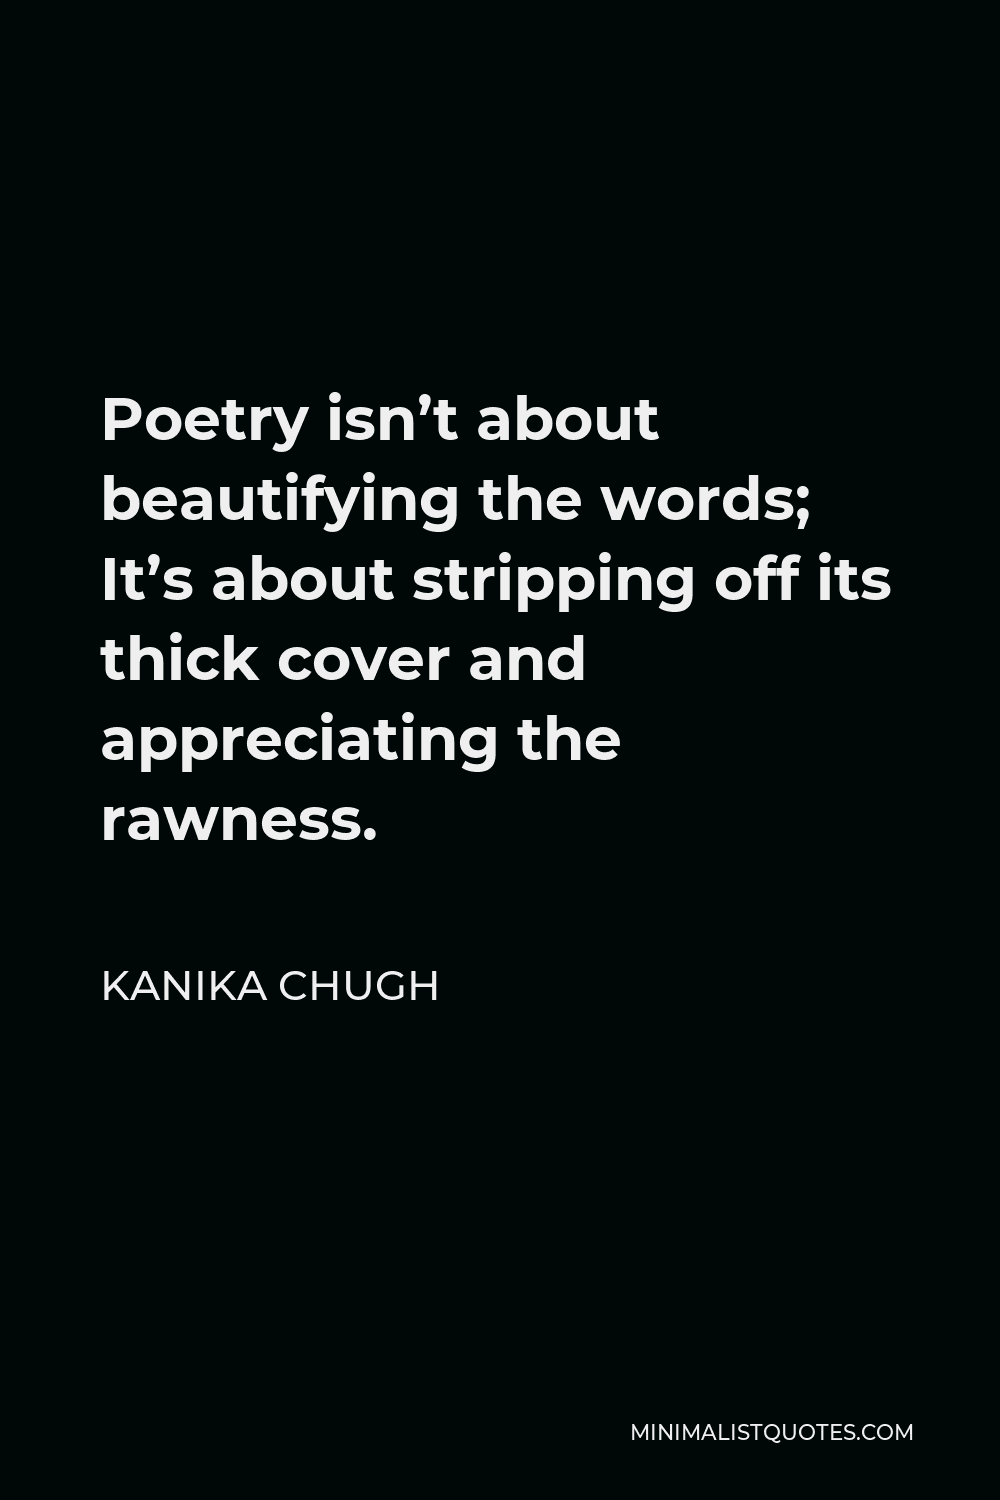 Kanika Chugh Quote - Poetry isn’t about beautifying the words; It’s about stripping off its thick cover and appreciating the rawness.